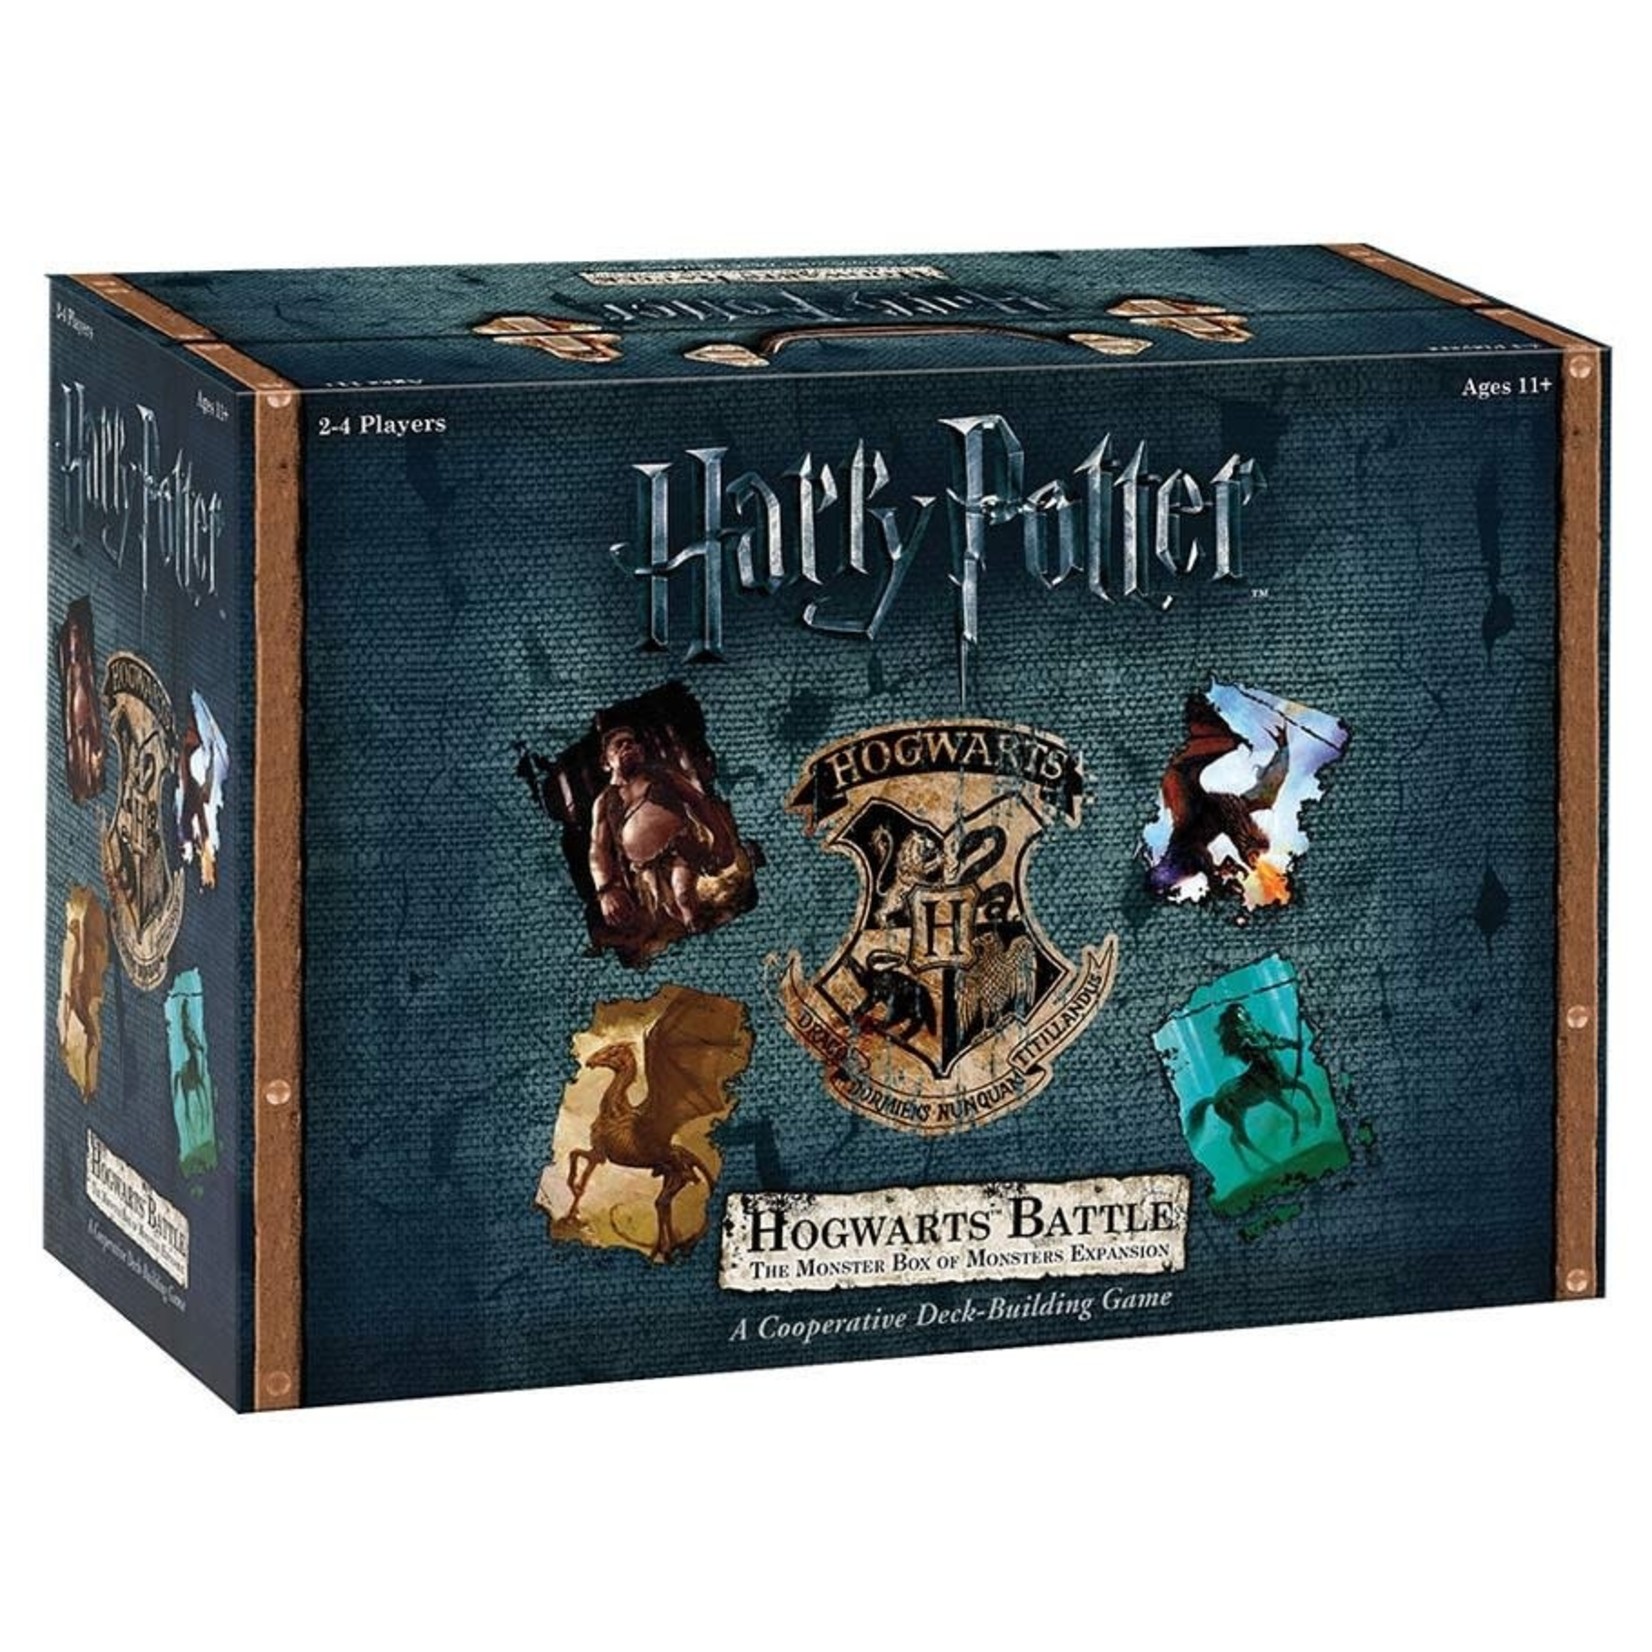 USAOPOLY Harry Potter Hogwarts Battle: The Monster Box Of Monsters Expansion